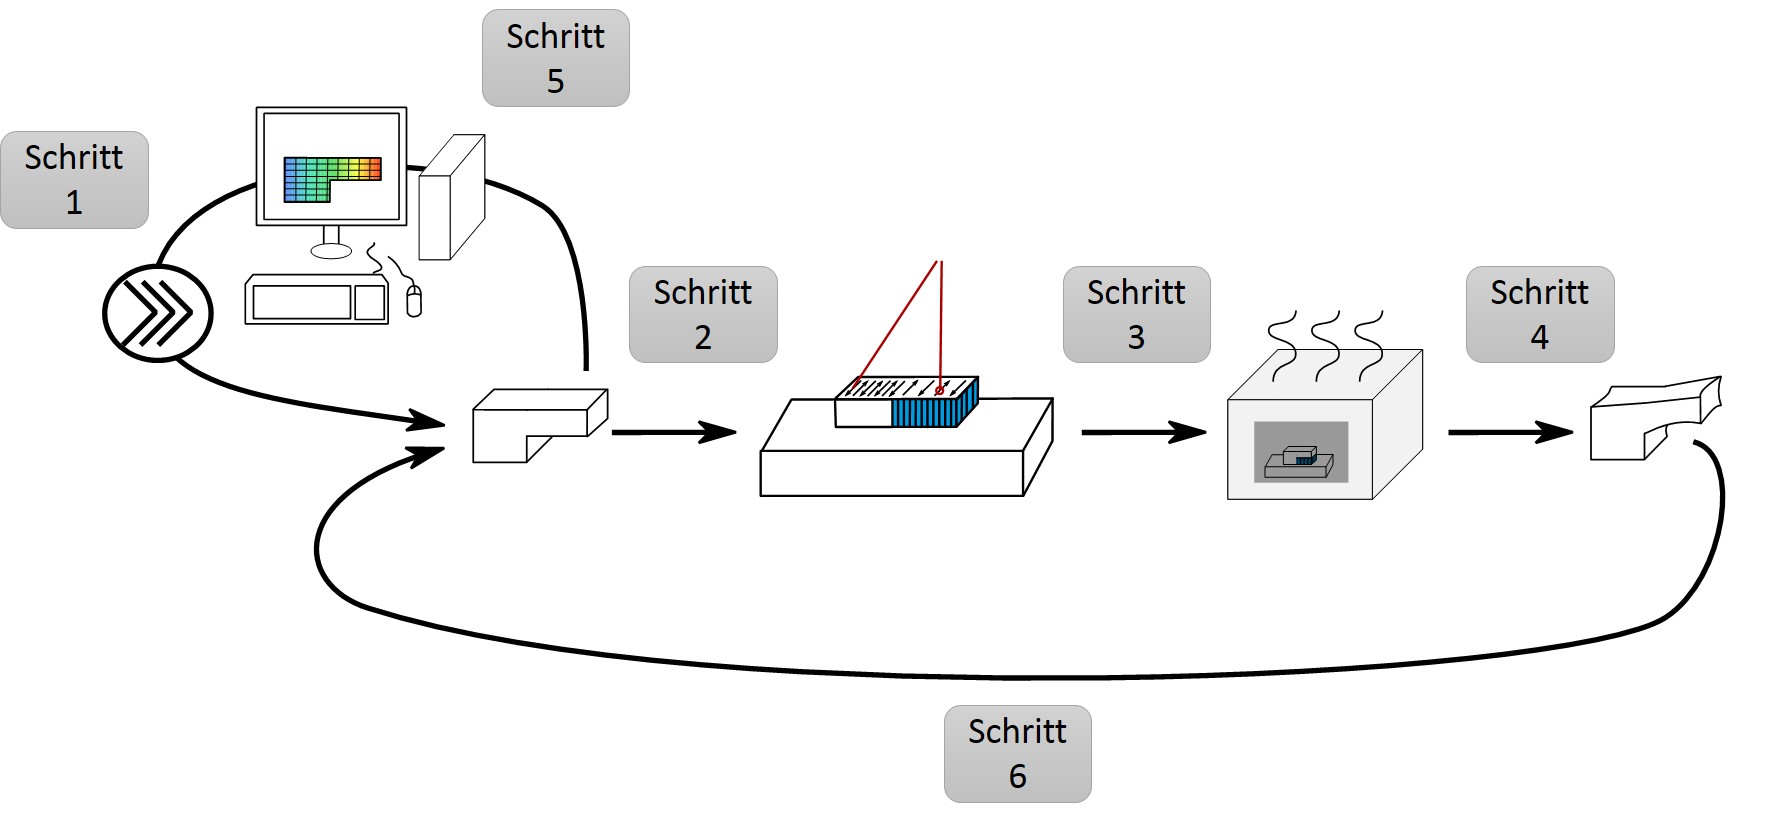 Overview of the process chain